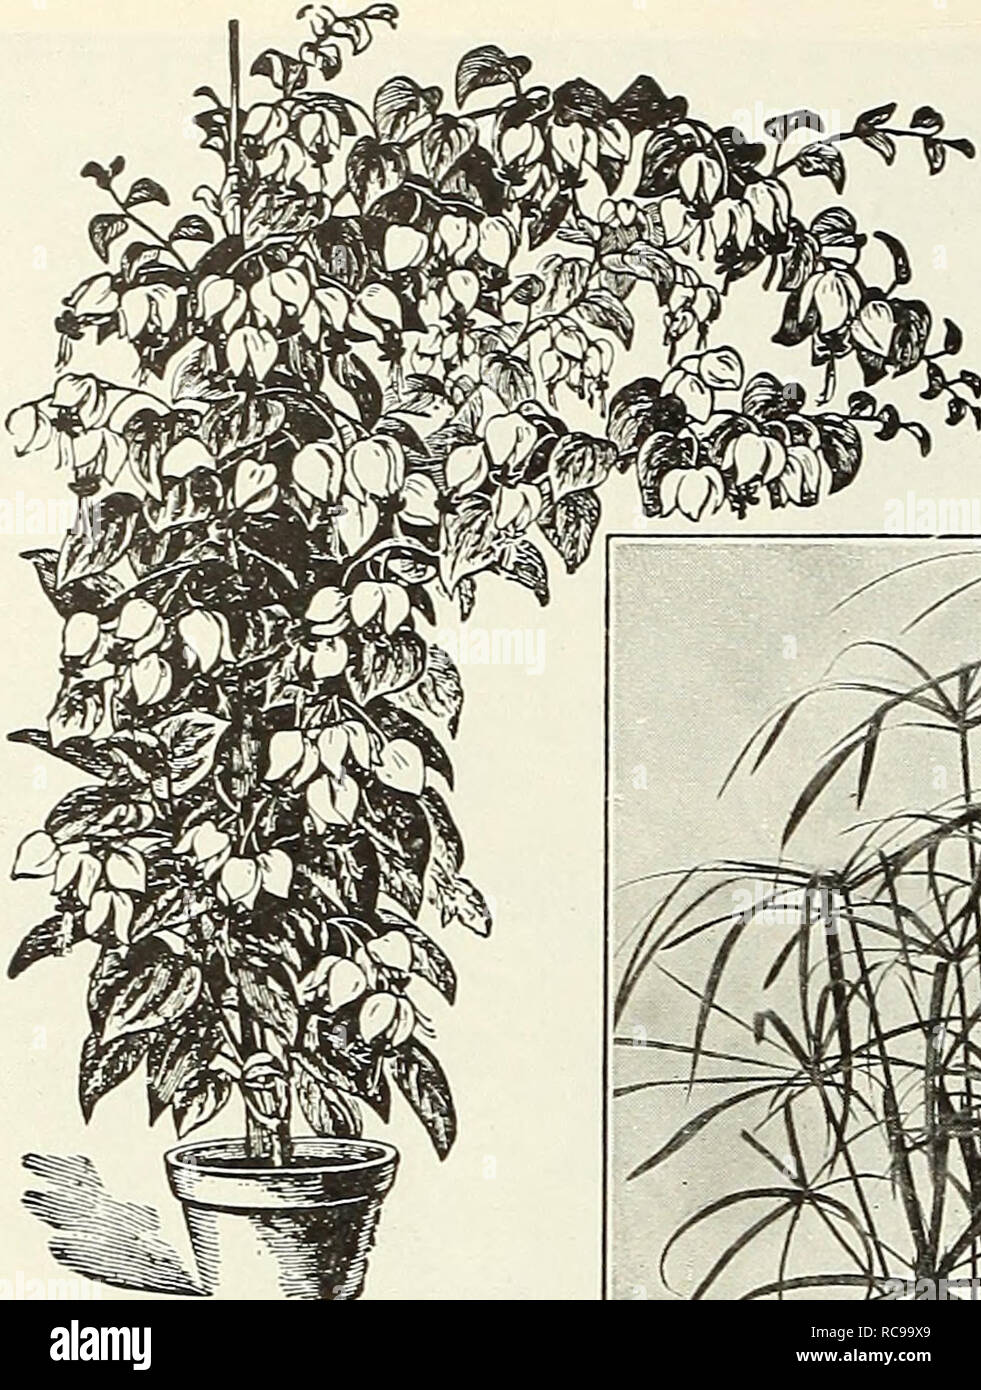 . Dreer's garden book 1923. Seeds Catalogs; Nursery stock Catalogs; Gardening Equipment and supplies Catalogs; Flowers Seeds Catalogs; Vegetables Seeds Catalogs; Fruit Seeds Catalogs. 156 flE!lRyA.IlER,^ ,QARDENÂ«Â»QREENHOUSEPLANIS i1&gt;HlLM!EliPHRlk ill ' â ^. Clerodendron BOOKS OM HORTICULTURE We offer on the 3rd page of the this catalogue did list of the cover of a splen- above. CyPERUS Alternifolius CESTRUM PARQUI (Night-blooming Jessamine) An interesting tender shrub of easy cultivation, either for pot culture or for planting in the garden when the weather gets warm, with small greenish Stock Photo